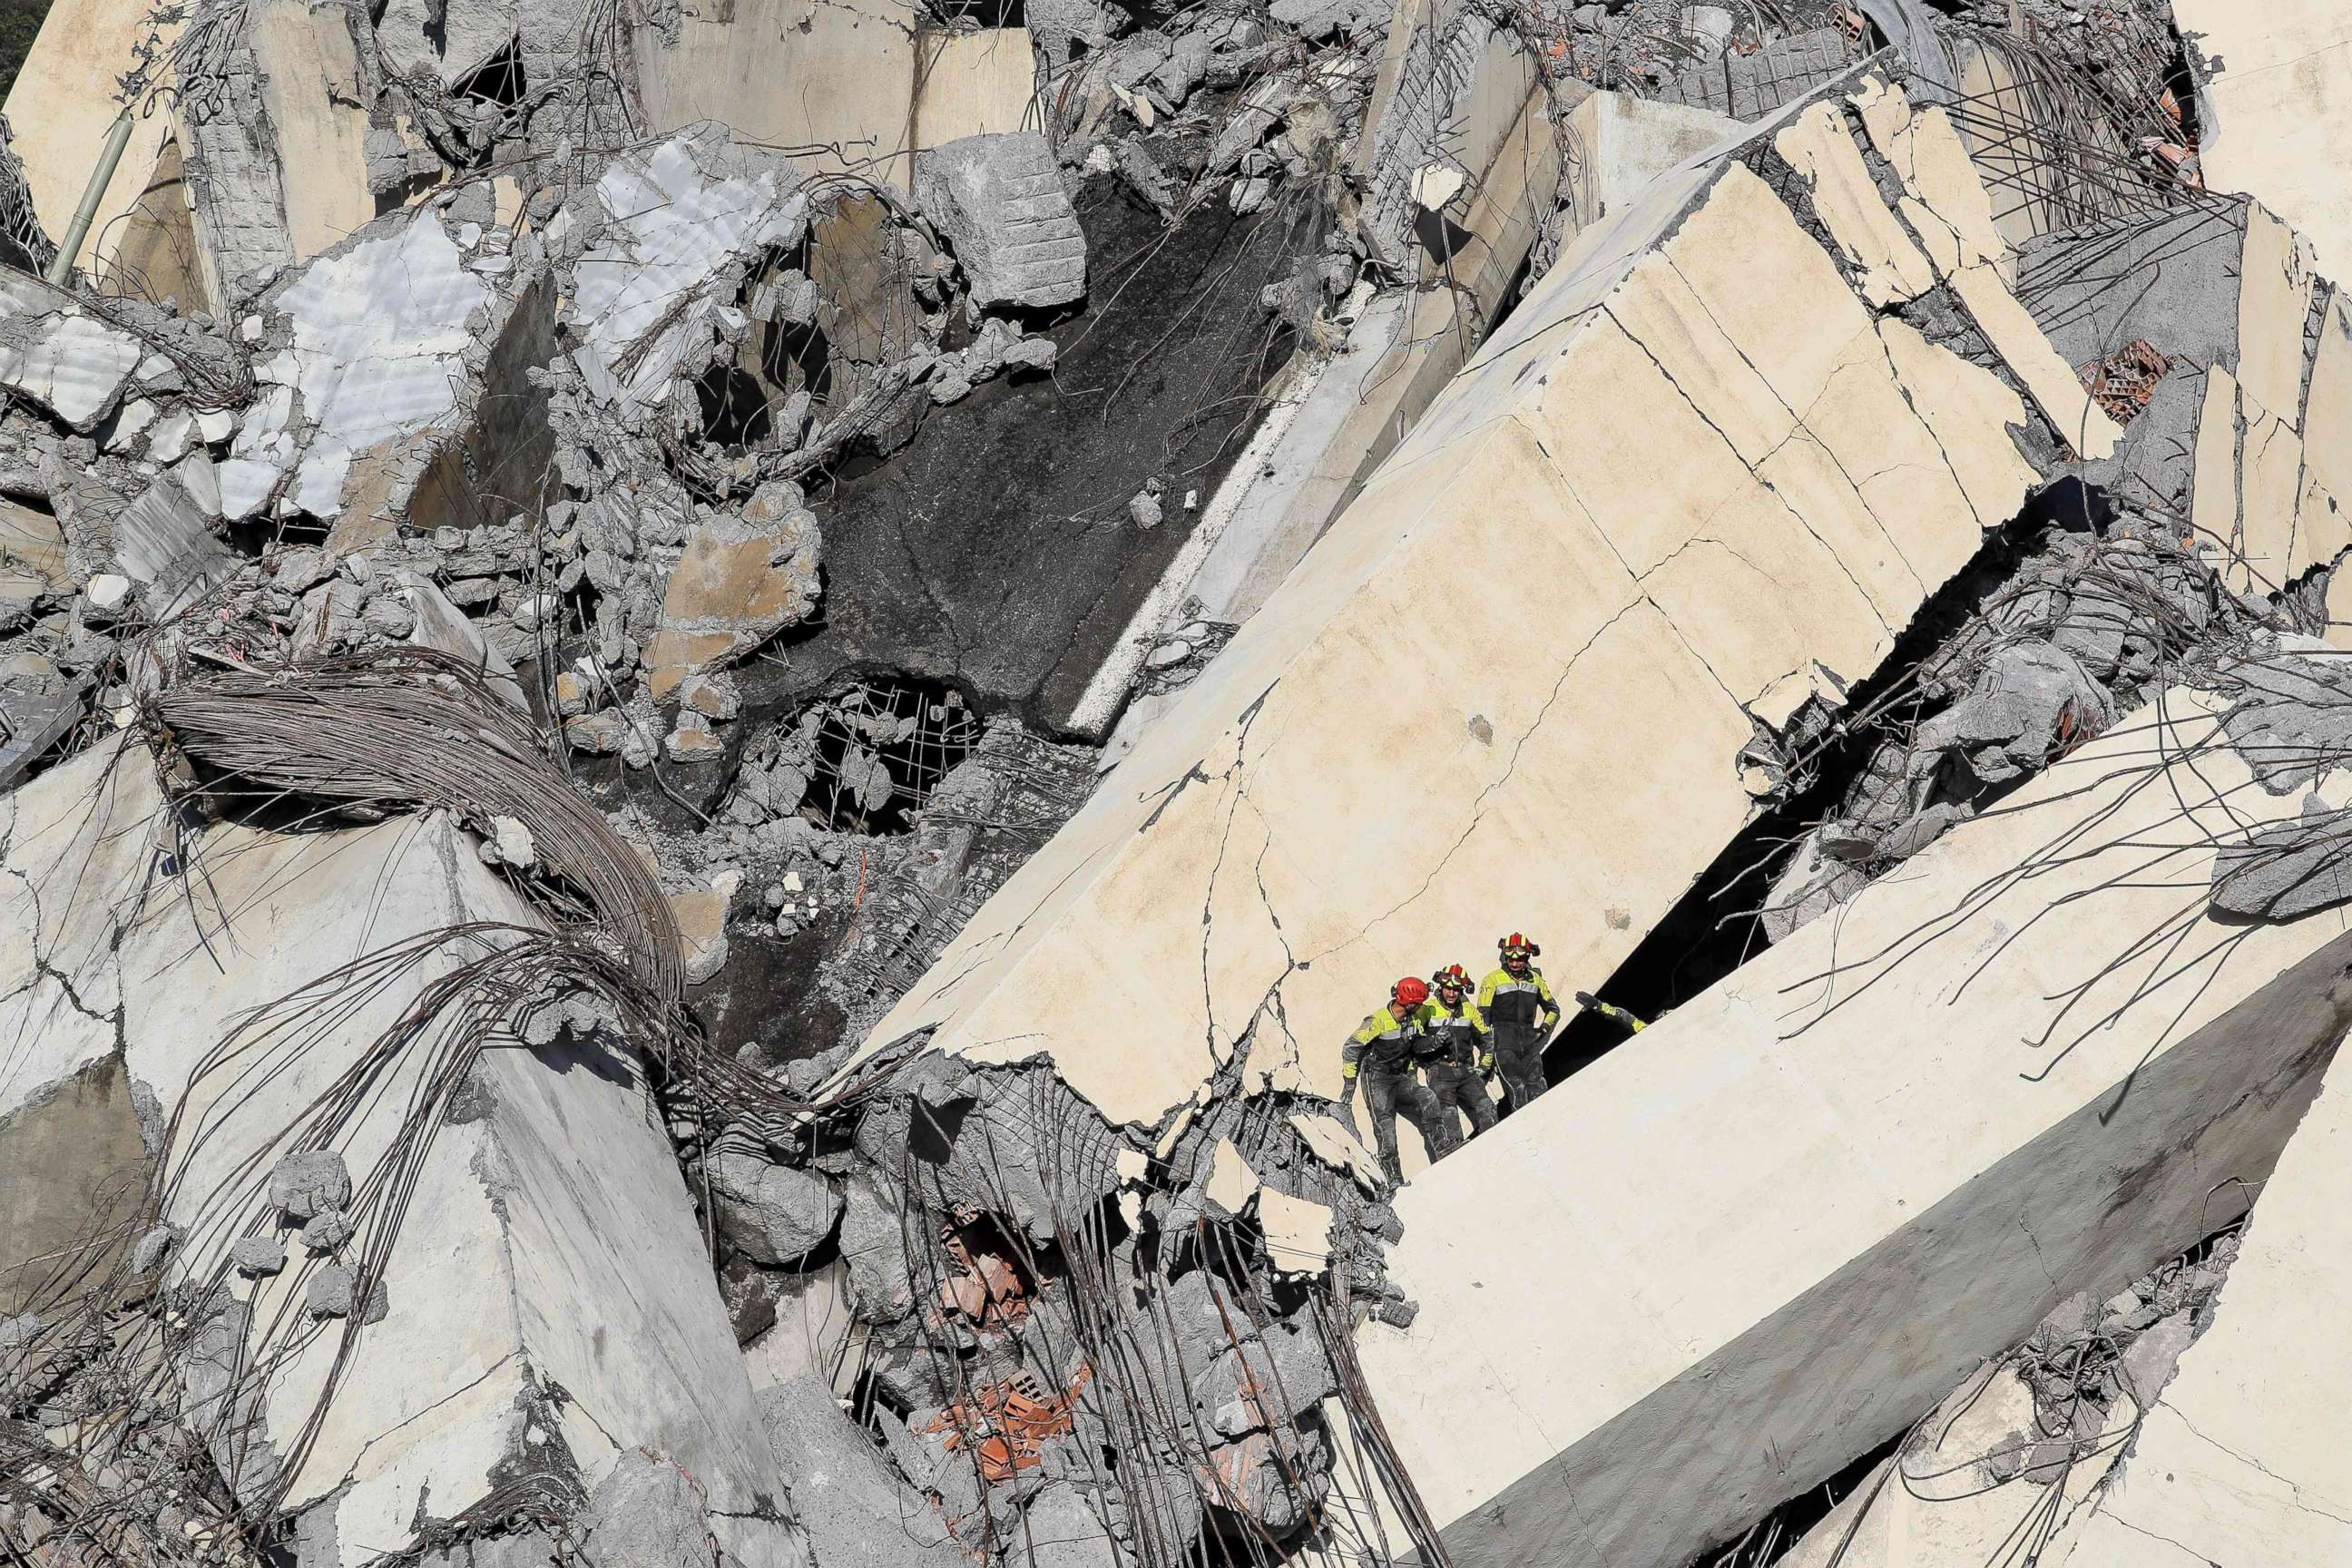 PHOTO: Italian rescuers climb onto the rubble of the collapsed Morandi motorway bridge to look for victims and survivors in the northern port city of Genoa on Aug. 14, 2018.